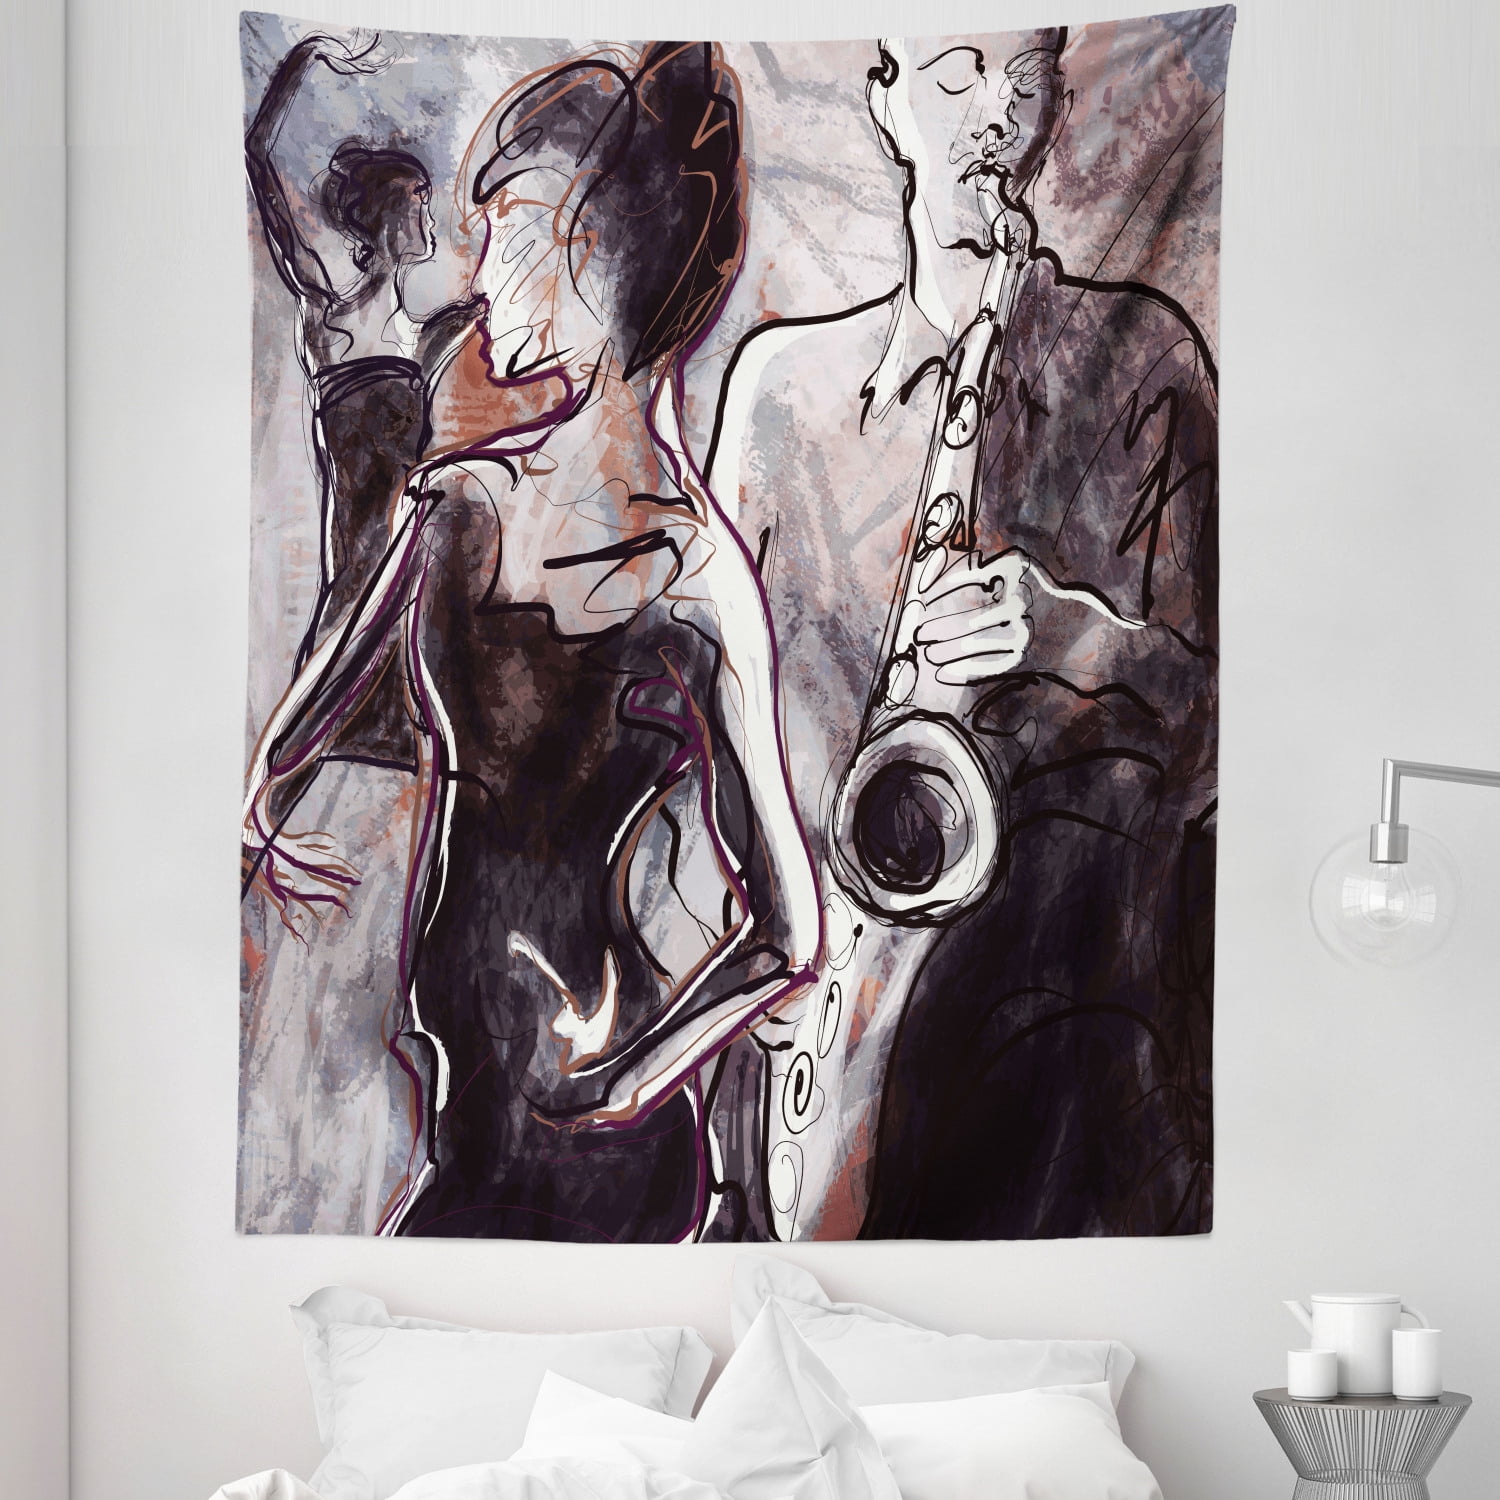 Jazz Music Classic Art Decor Tapestry Wall Hanging for Living Room Bedroom Dorm 